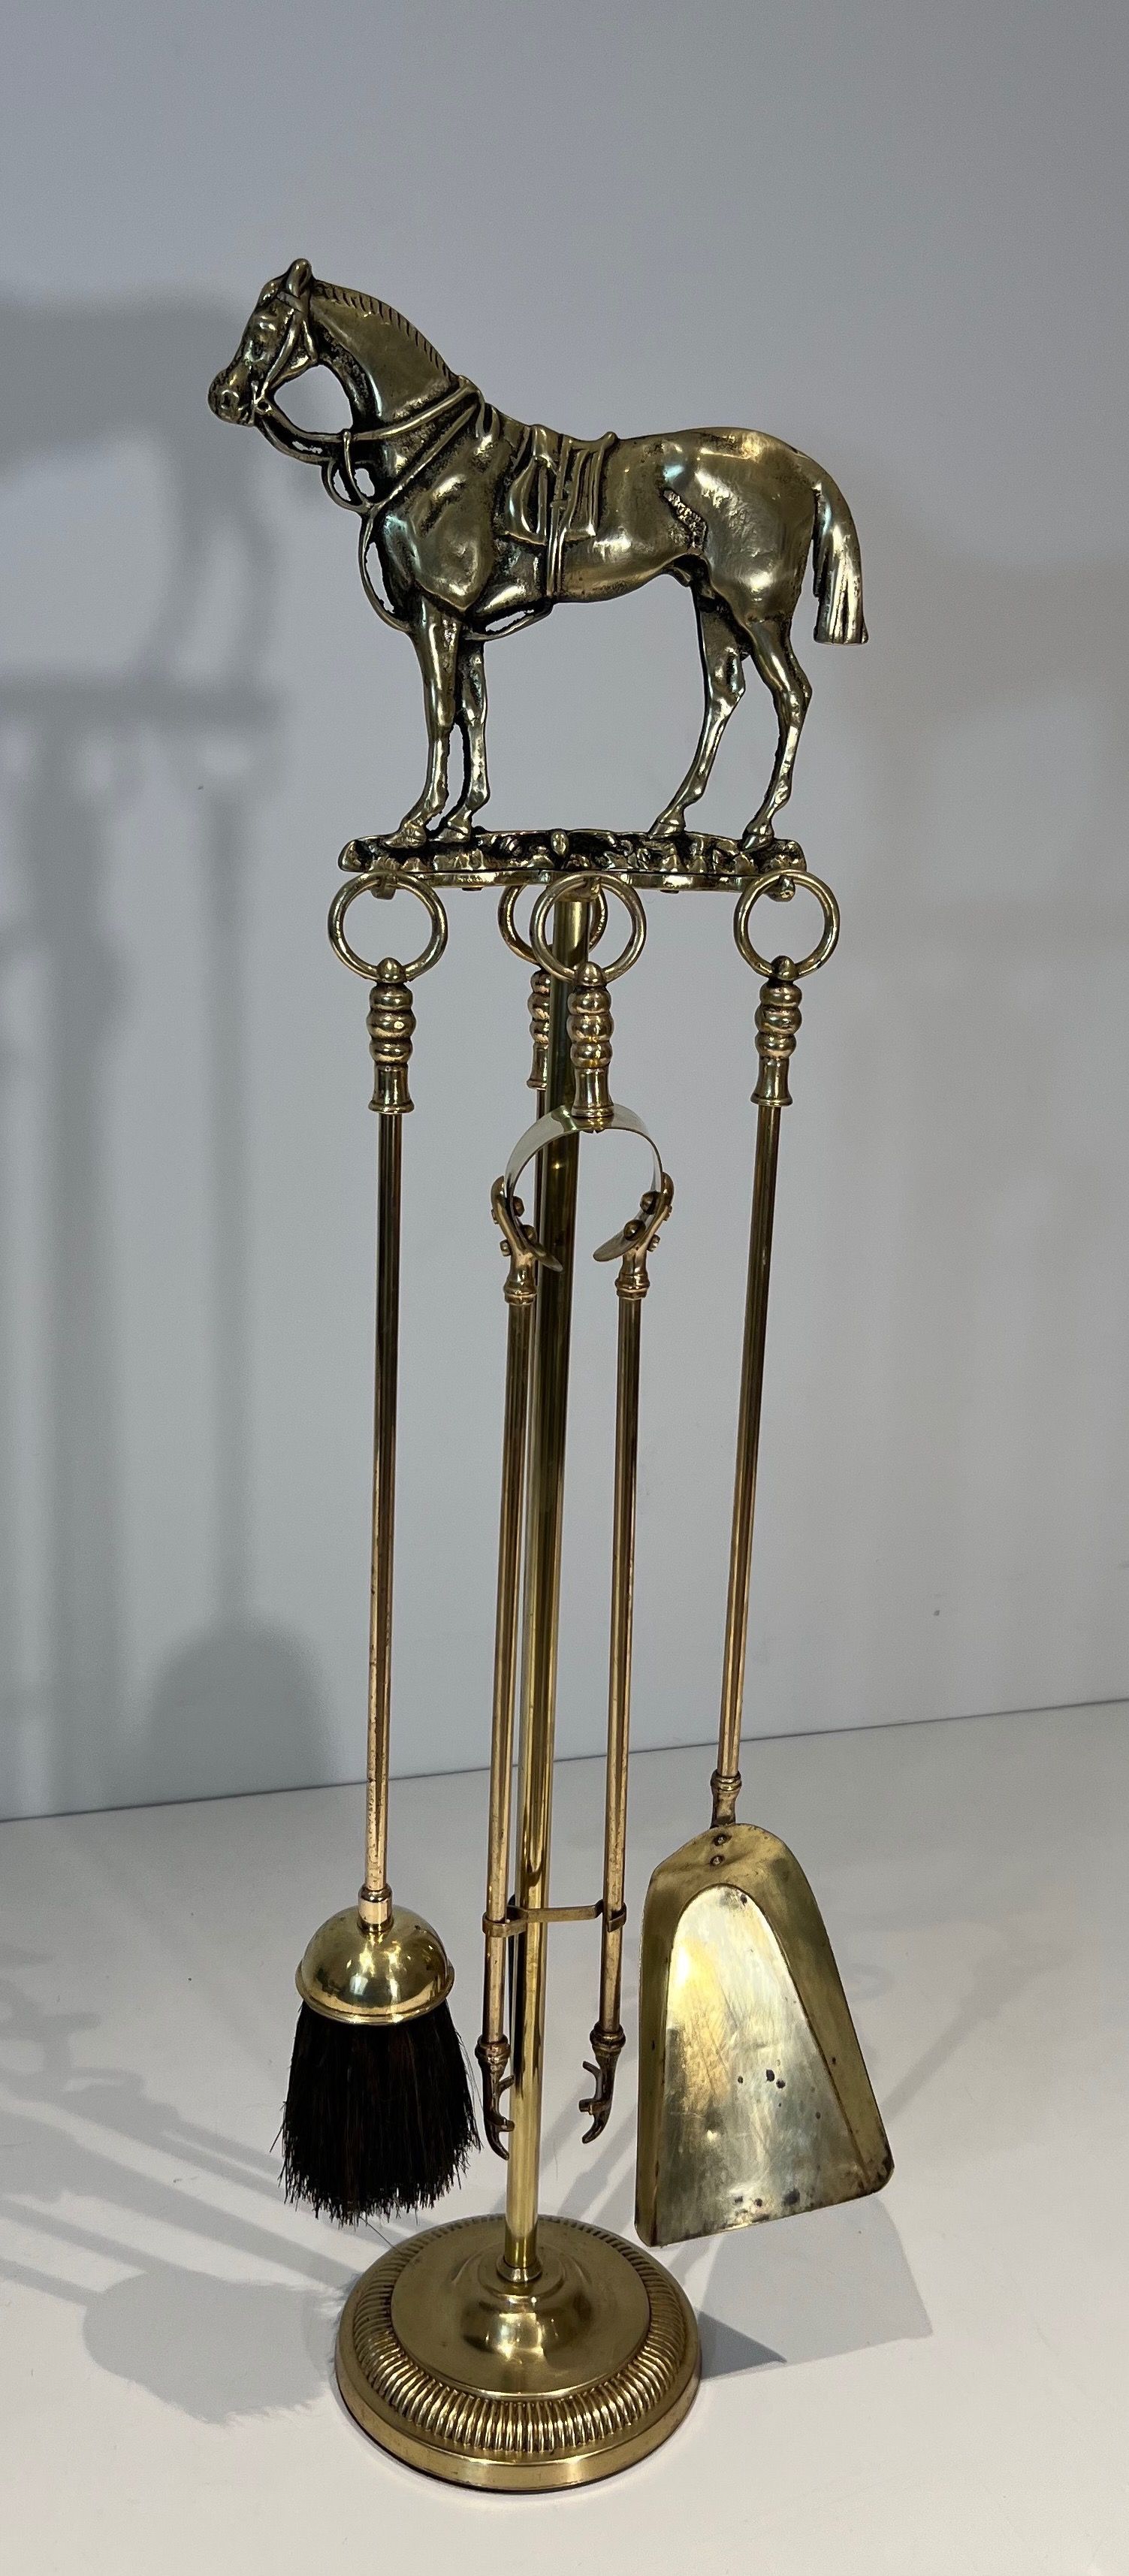 Brass Fireplace Tools Surmounted by a Sculpture representing a Horse